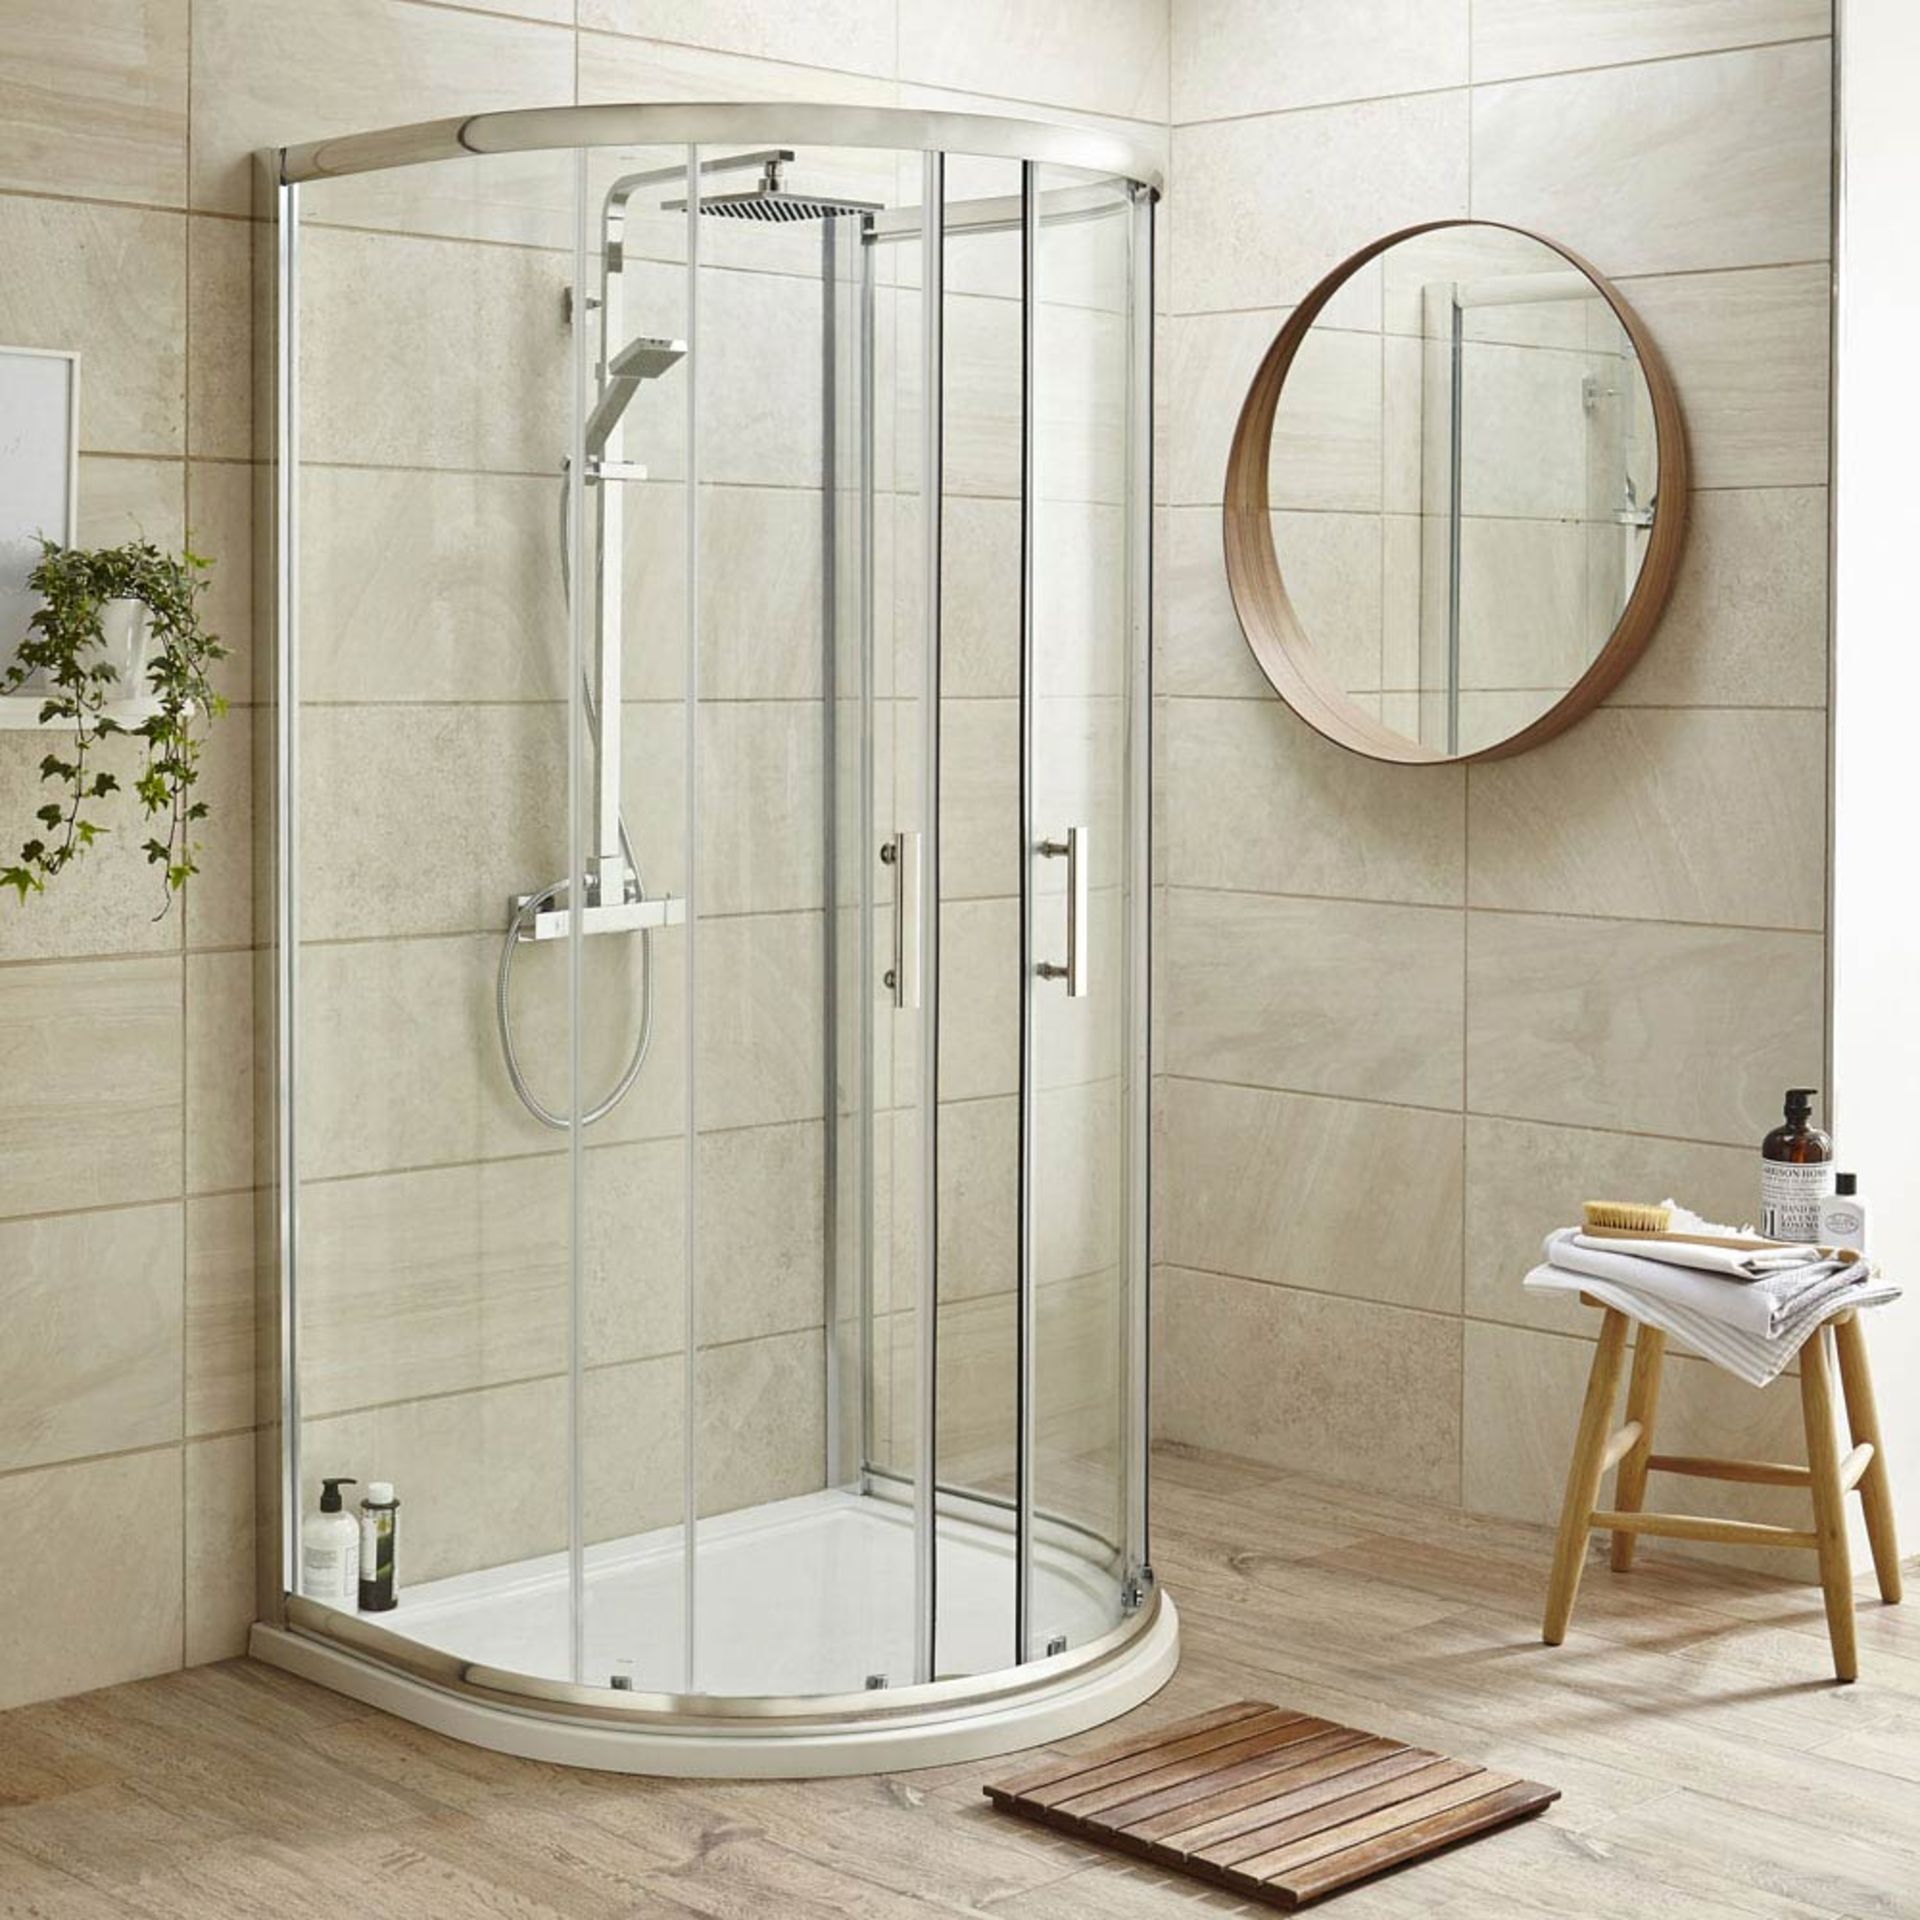 Brand New (PC41) Twyfords 770mm Hydro D Shape White Shower tray. Low profile ultra slim design Gel c - Image 3 of 3